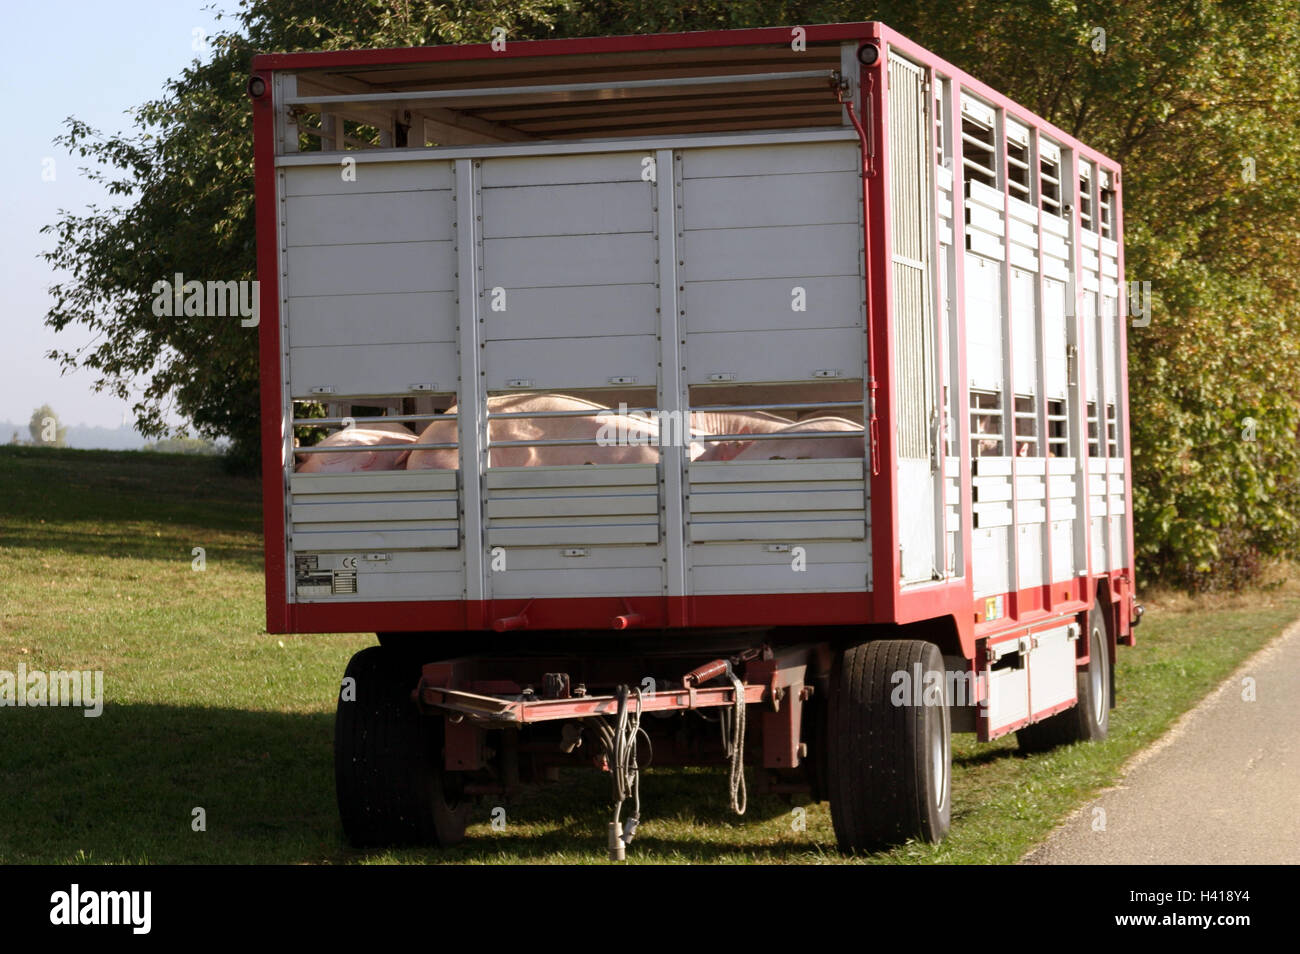 Roadside, cattle truck, parking, pigs, summers, cattle transport, animal transport, transport, trailer, put down, park, battle cattle, cattle, benefit animals, pig-breeding, animal cruelty, dimension keeping pets, shortage space, heat, protection animals Stock Photo